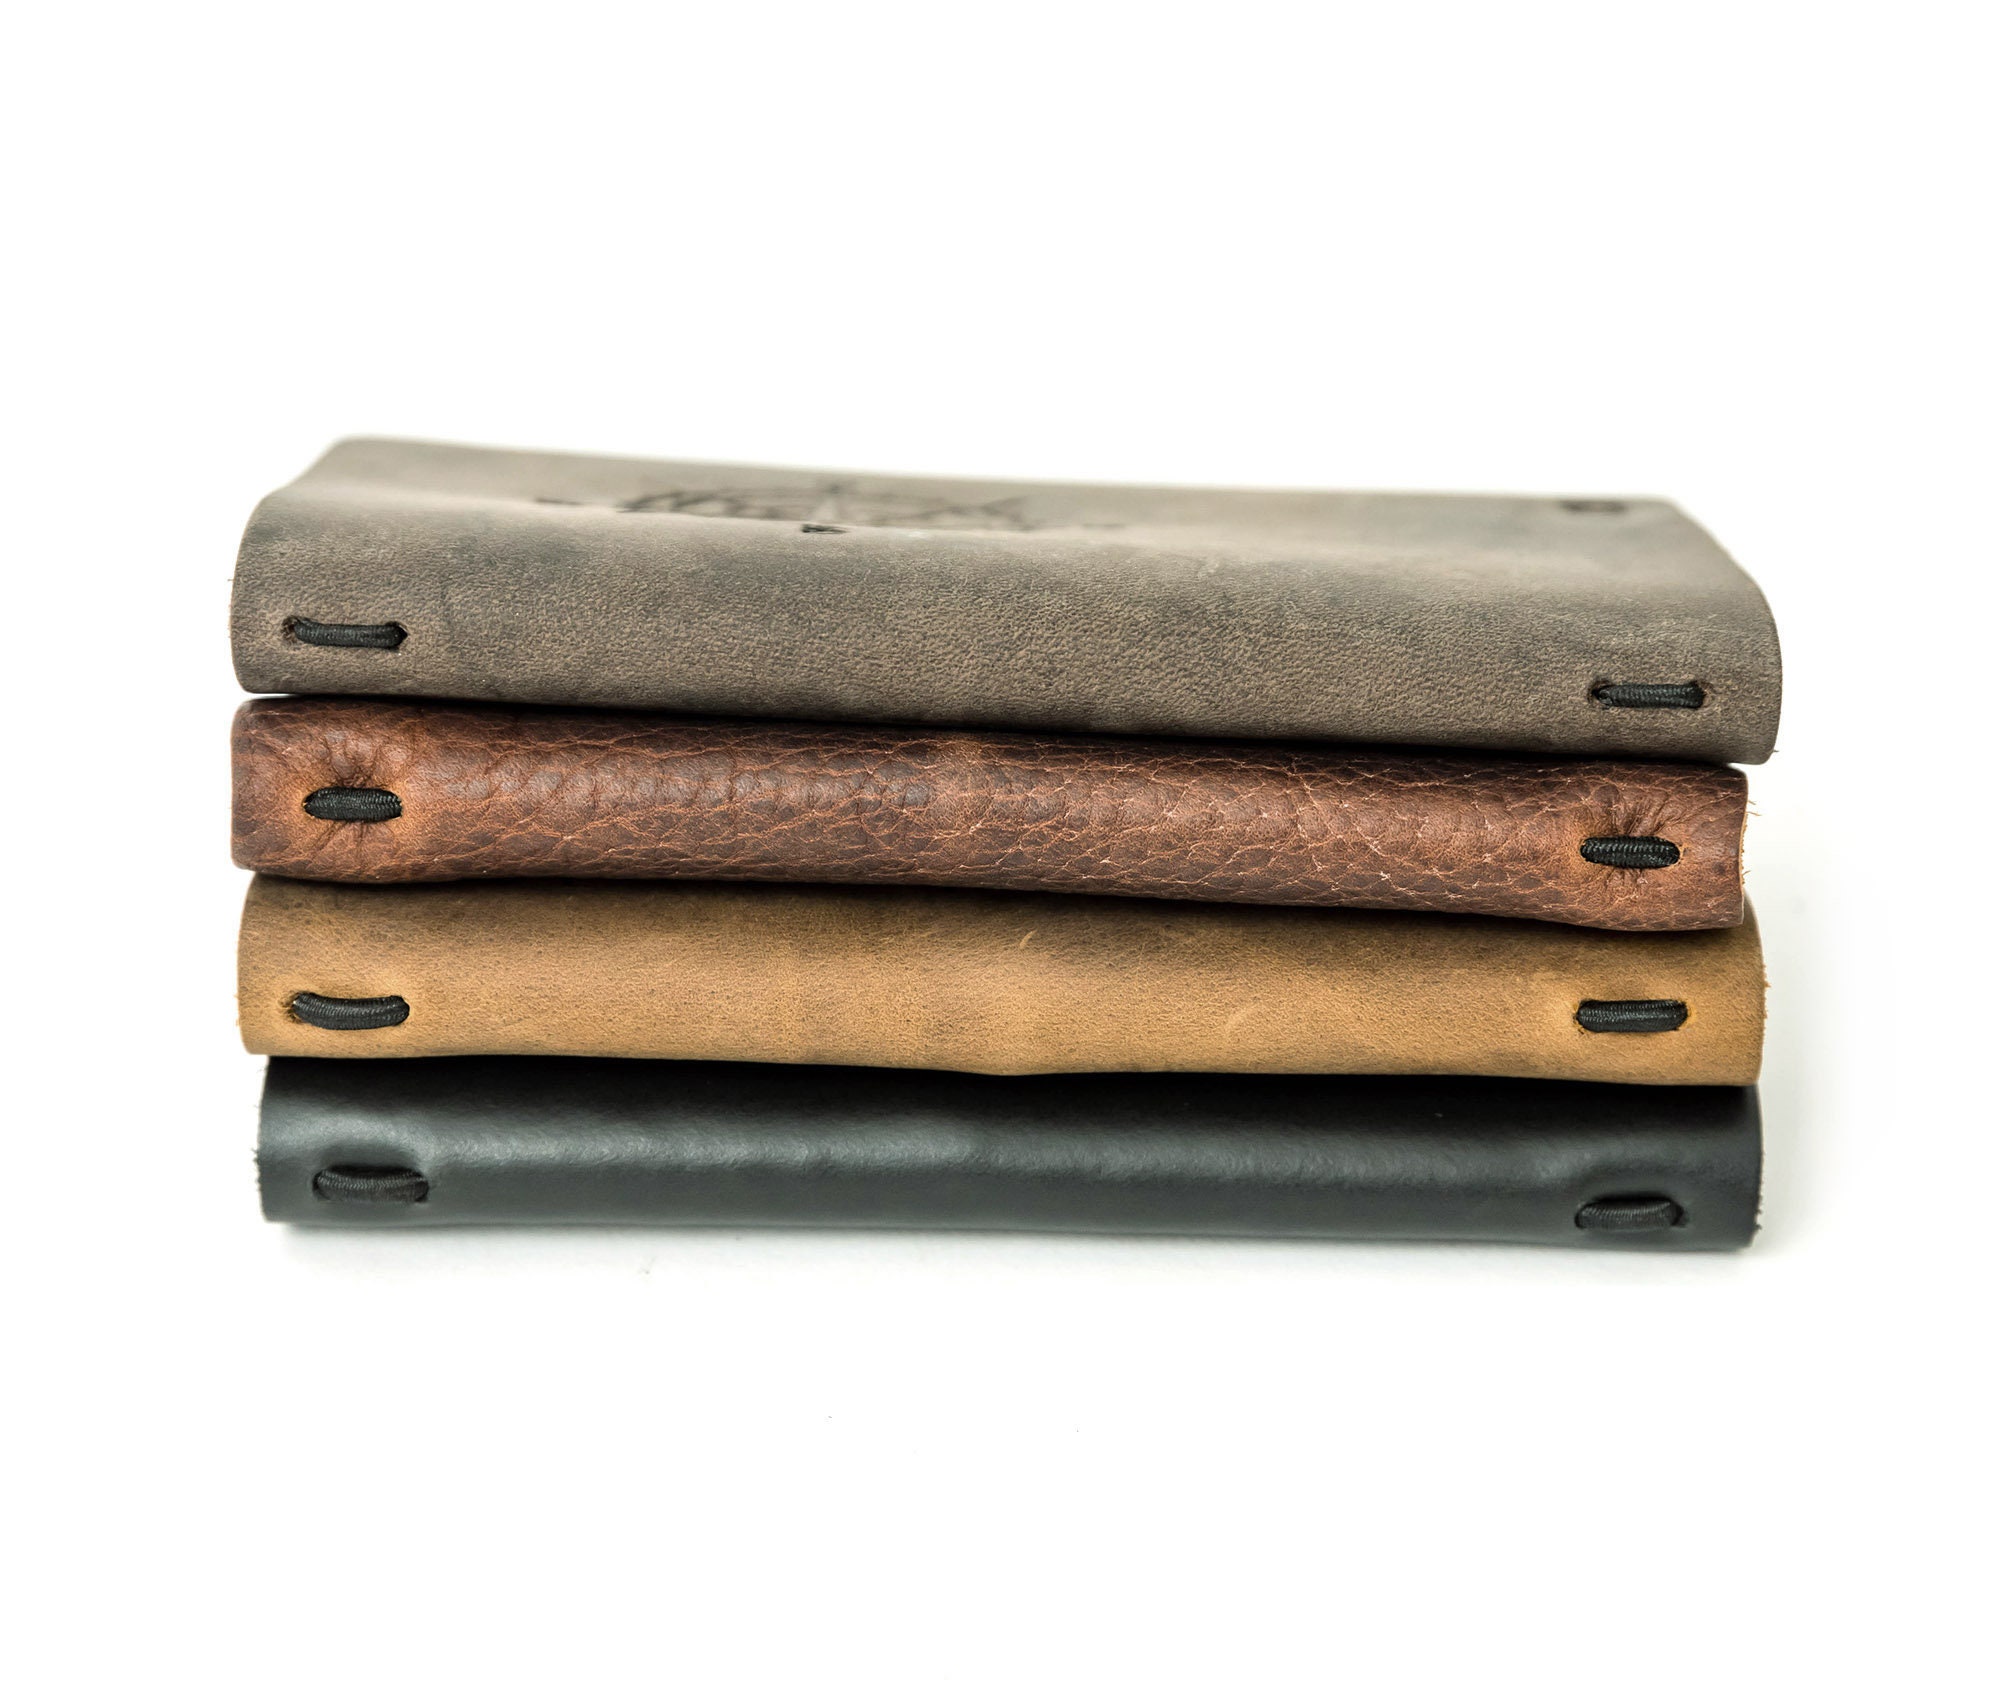 Tenceur Refillable Leather Journal Notebook Set Includes 7.9 x 4.7